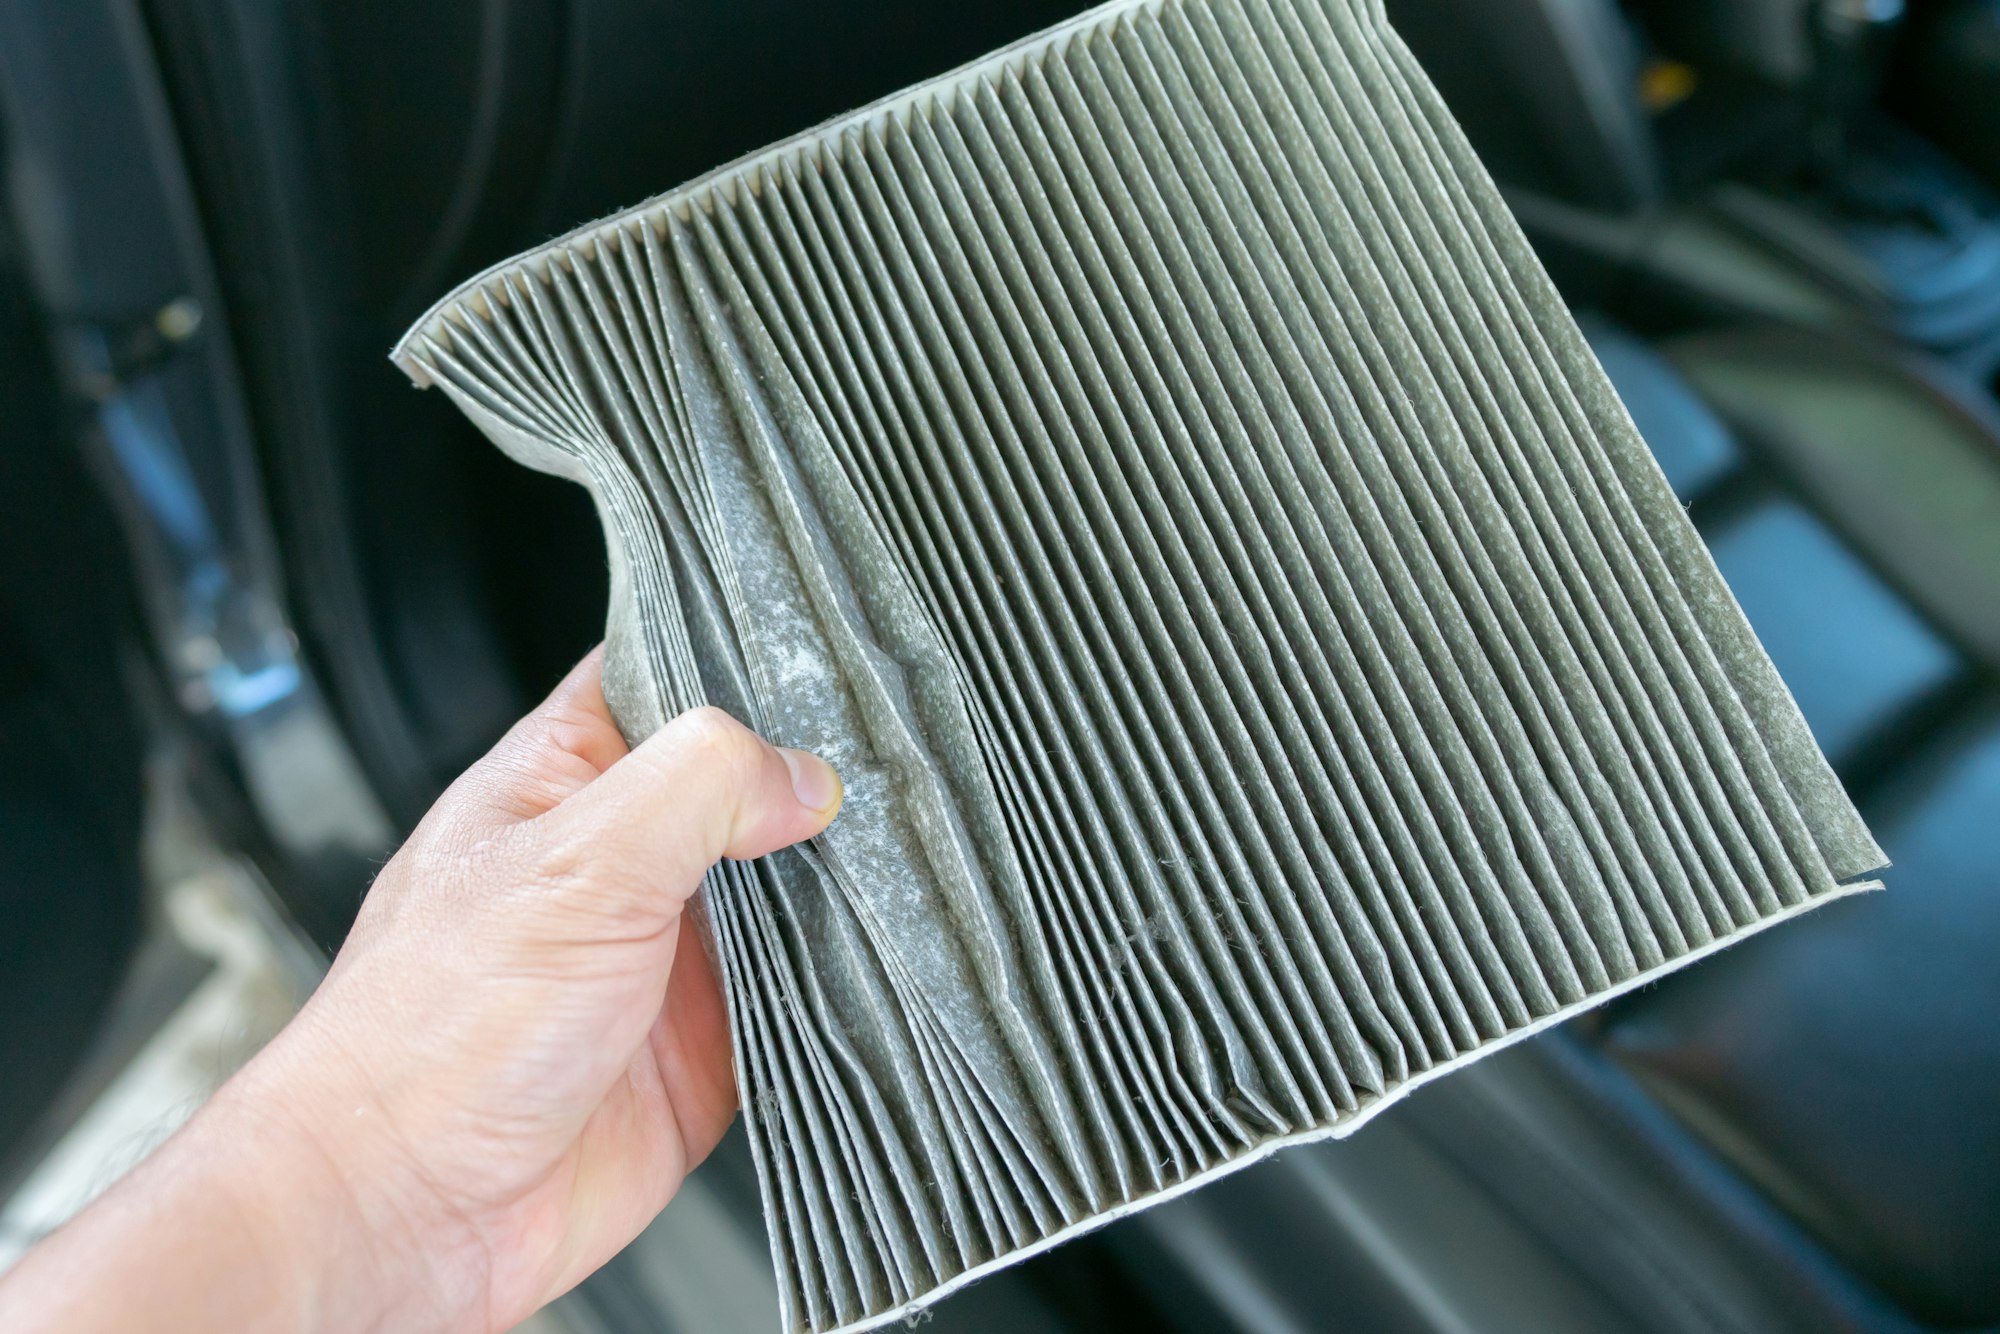 hand hold dirty car air conditioning filter